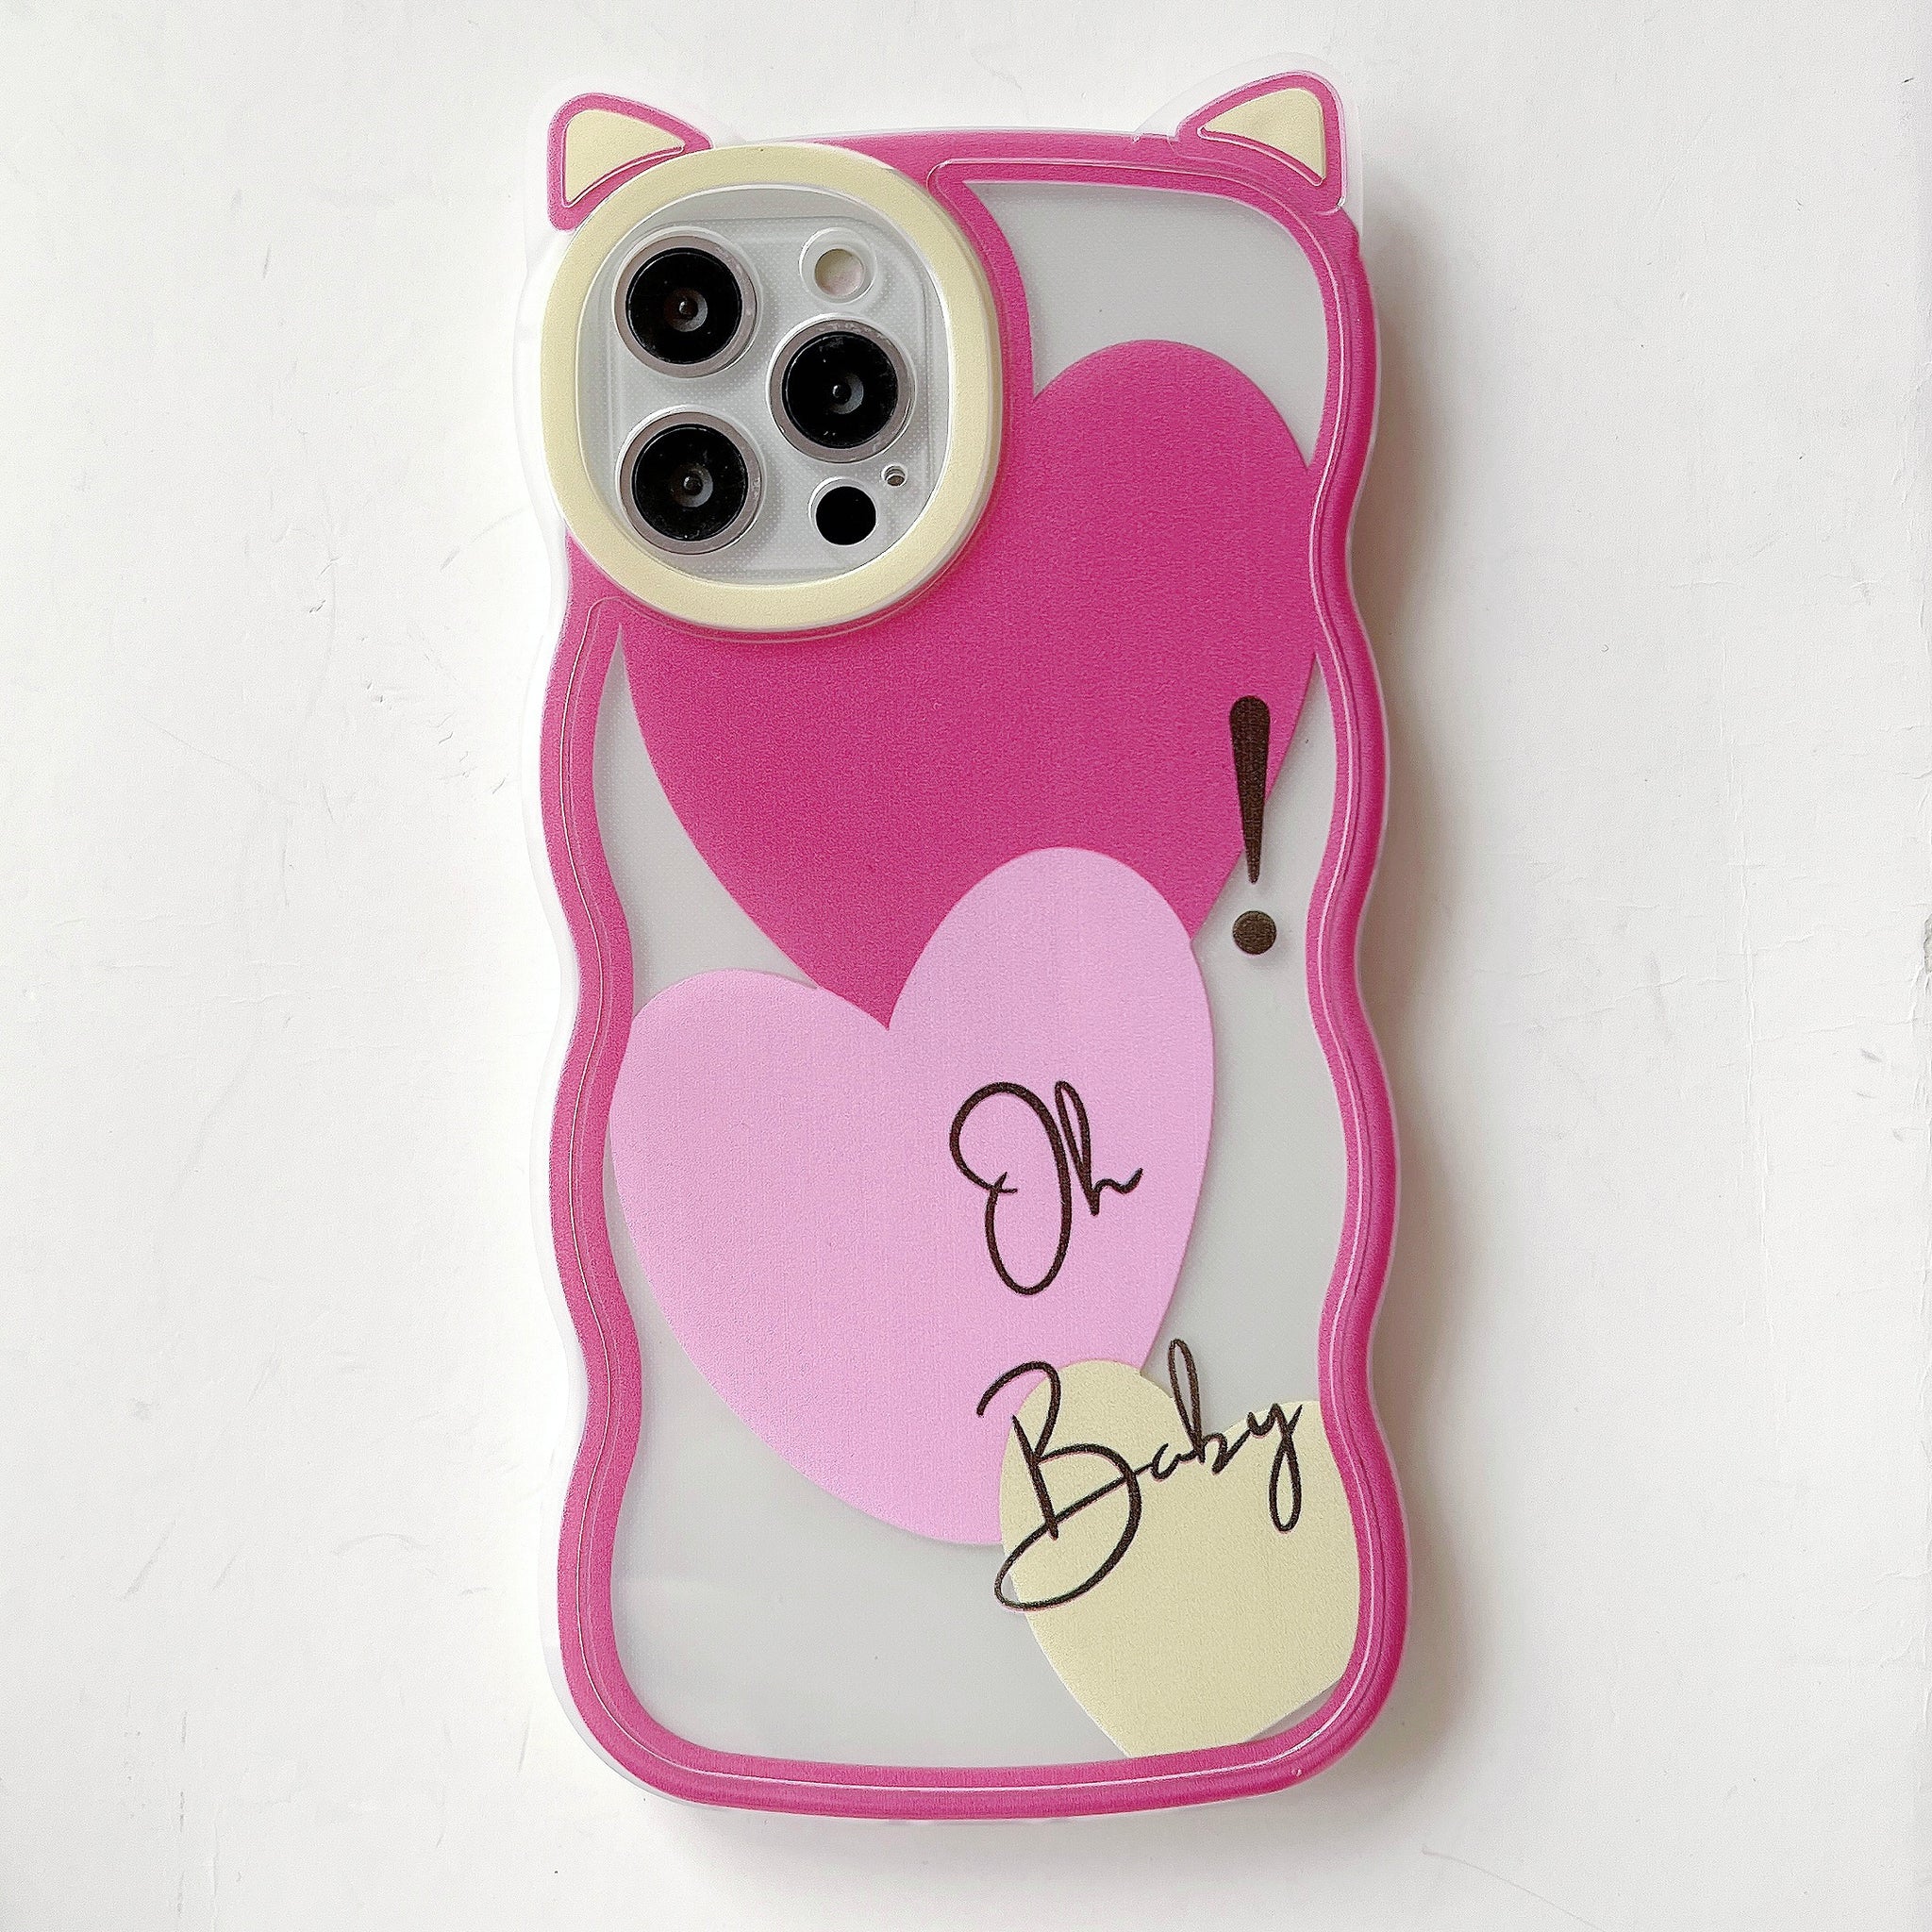 Cute Heart Pattern with Kitty Ears iPhone Case for Series14 13 12 11 Pro Max X Xs